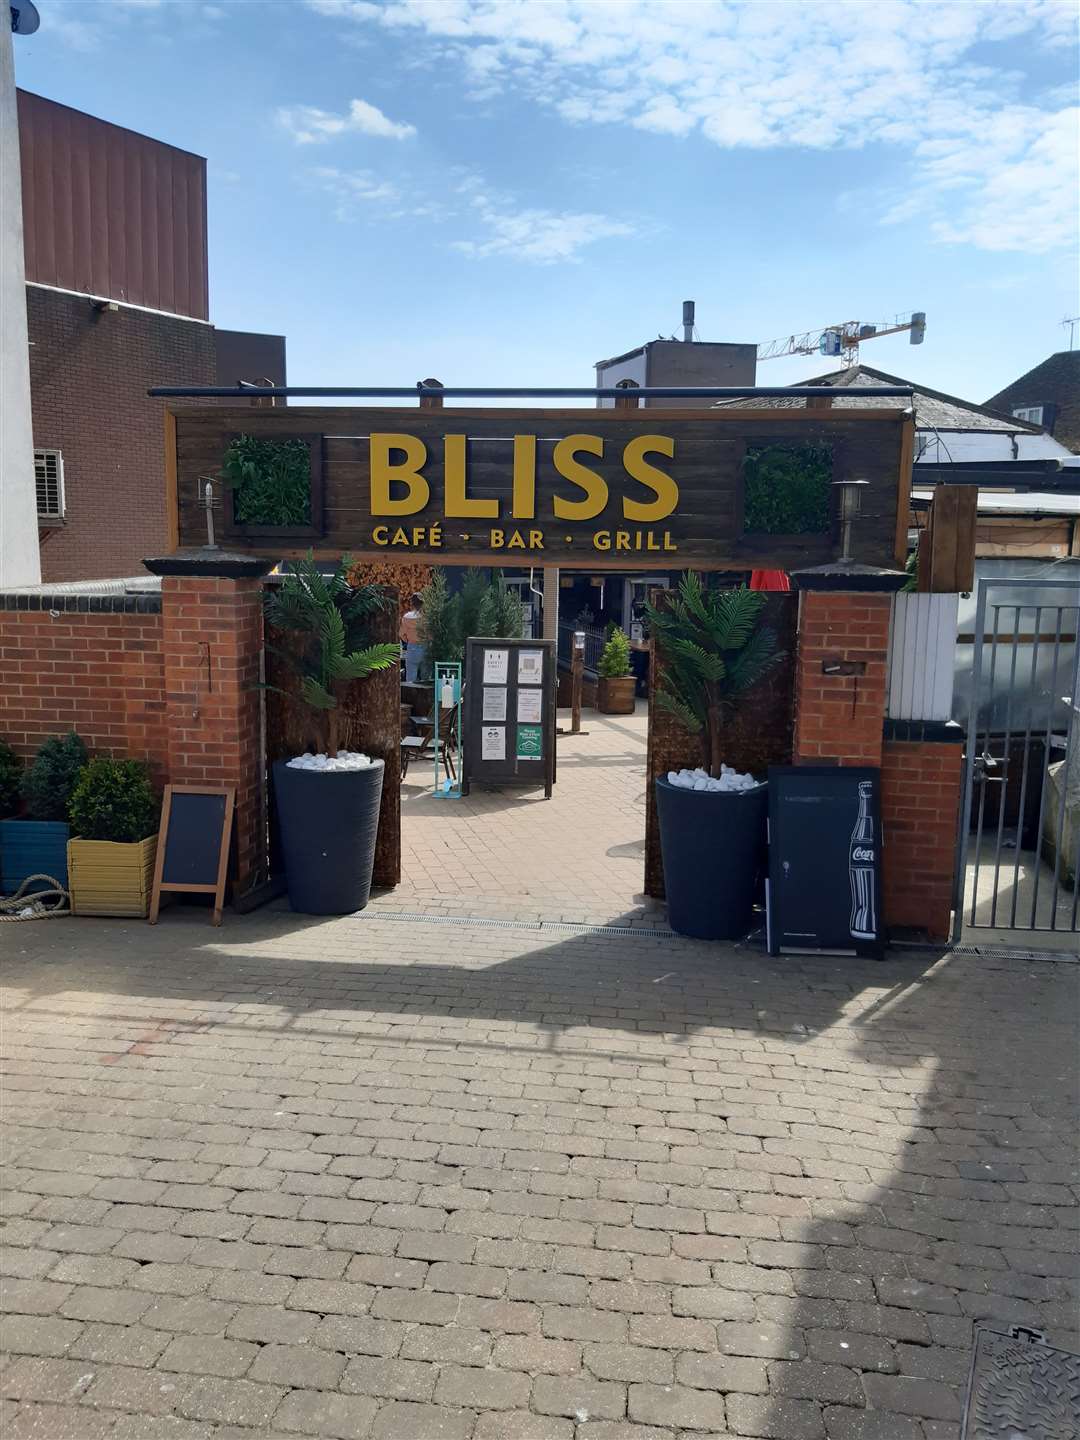 The new Bliss cafe bar in Maidstone